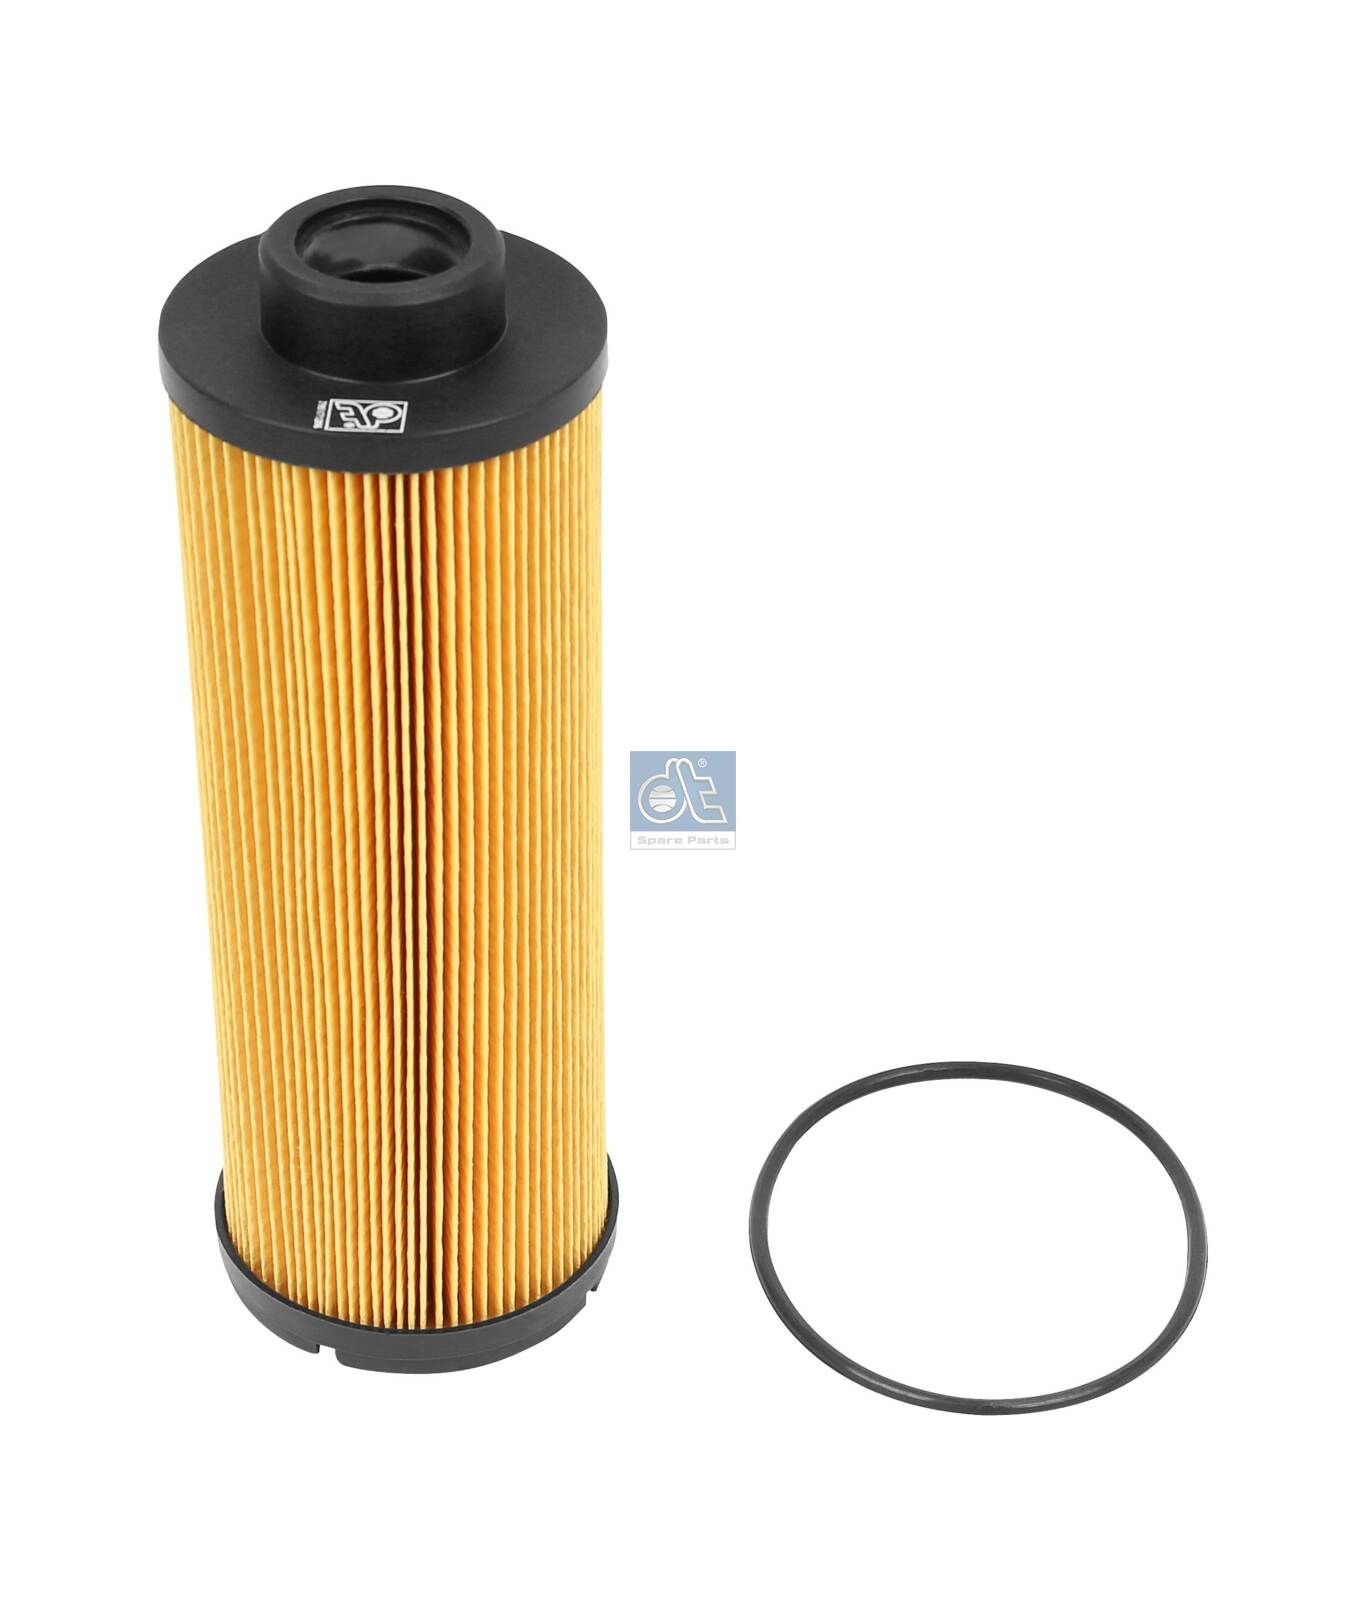 PU 850 x DT Spare Parts 3.22013 Fuel filter 51.12503.0048